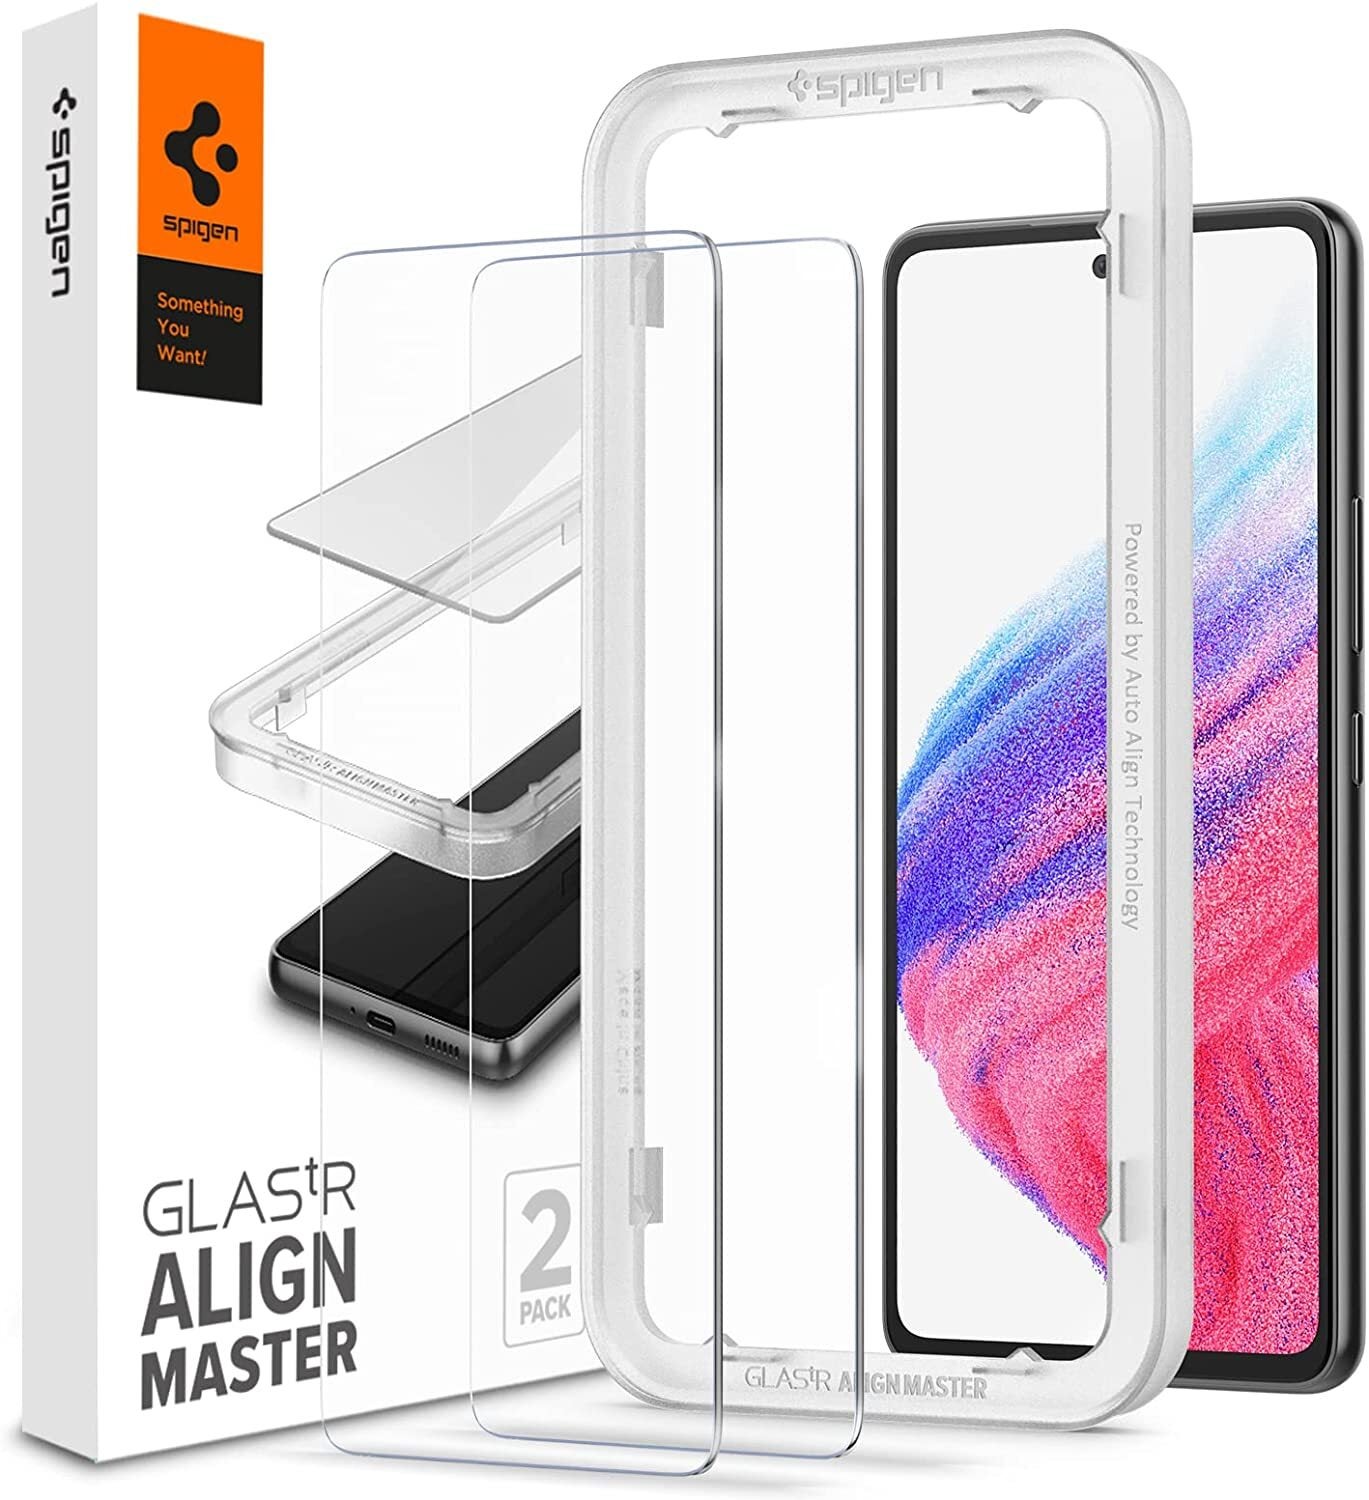 The best Galaxy A53 screen protectors you can get